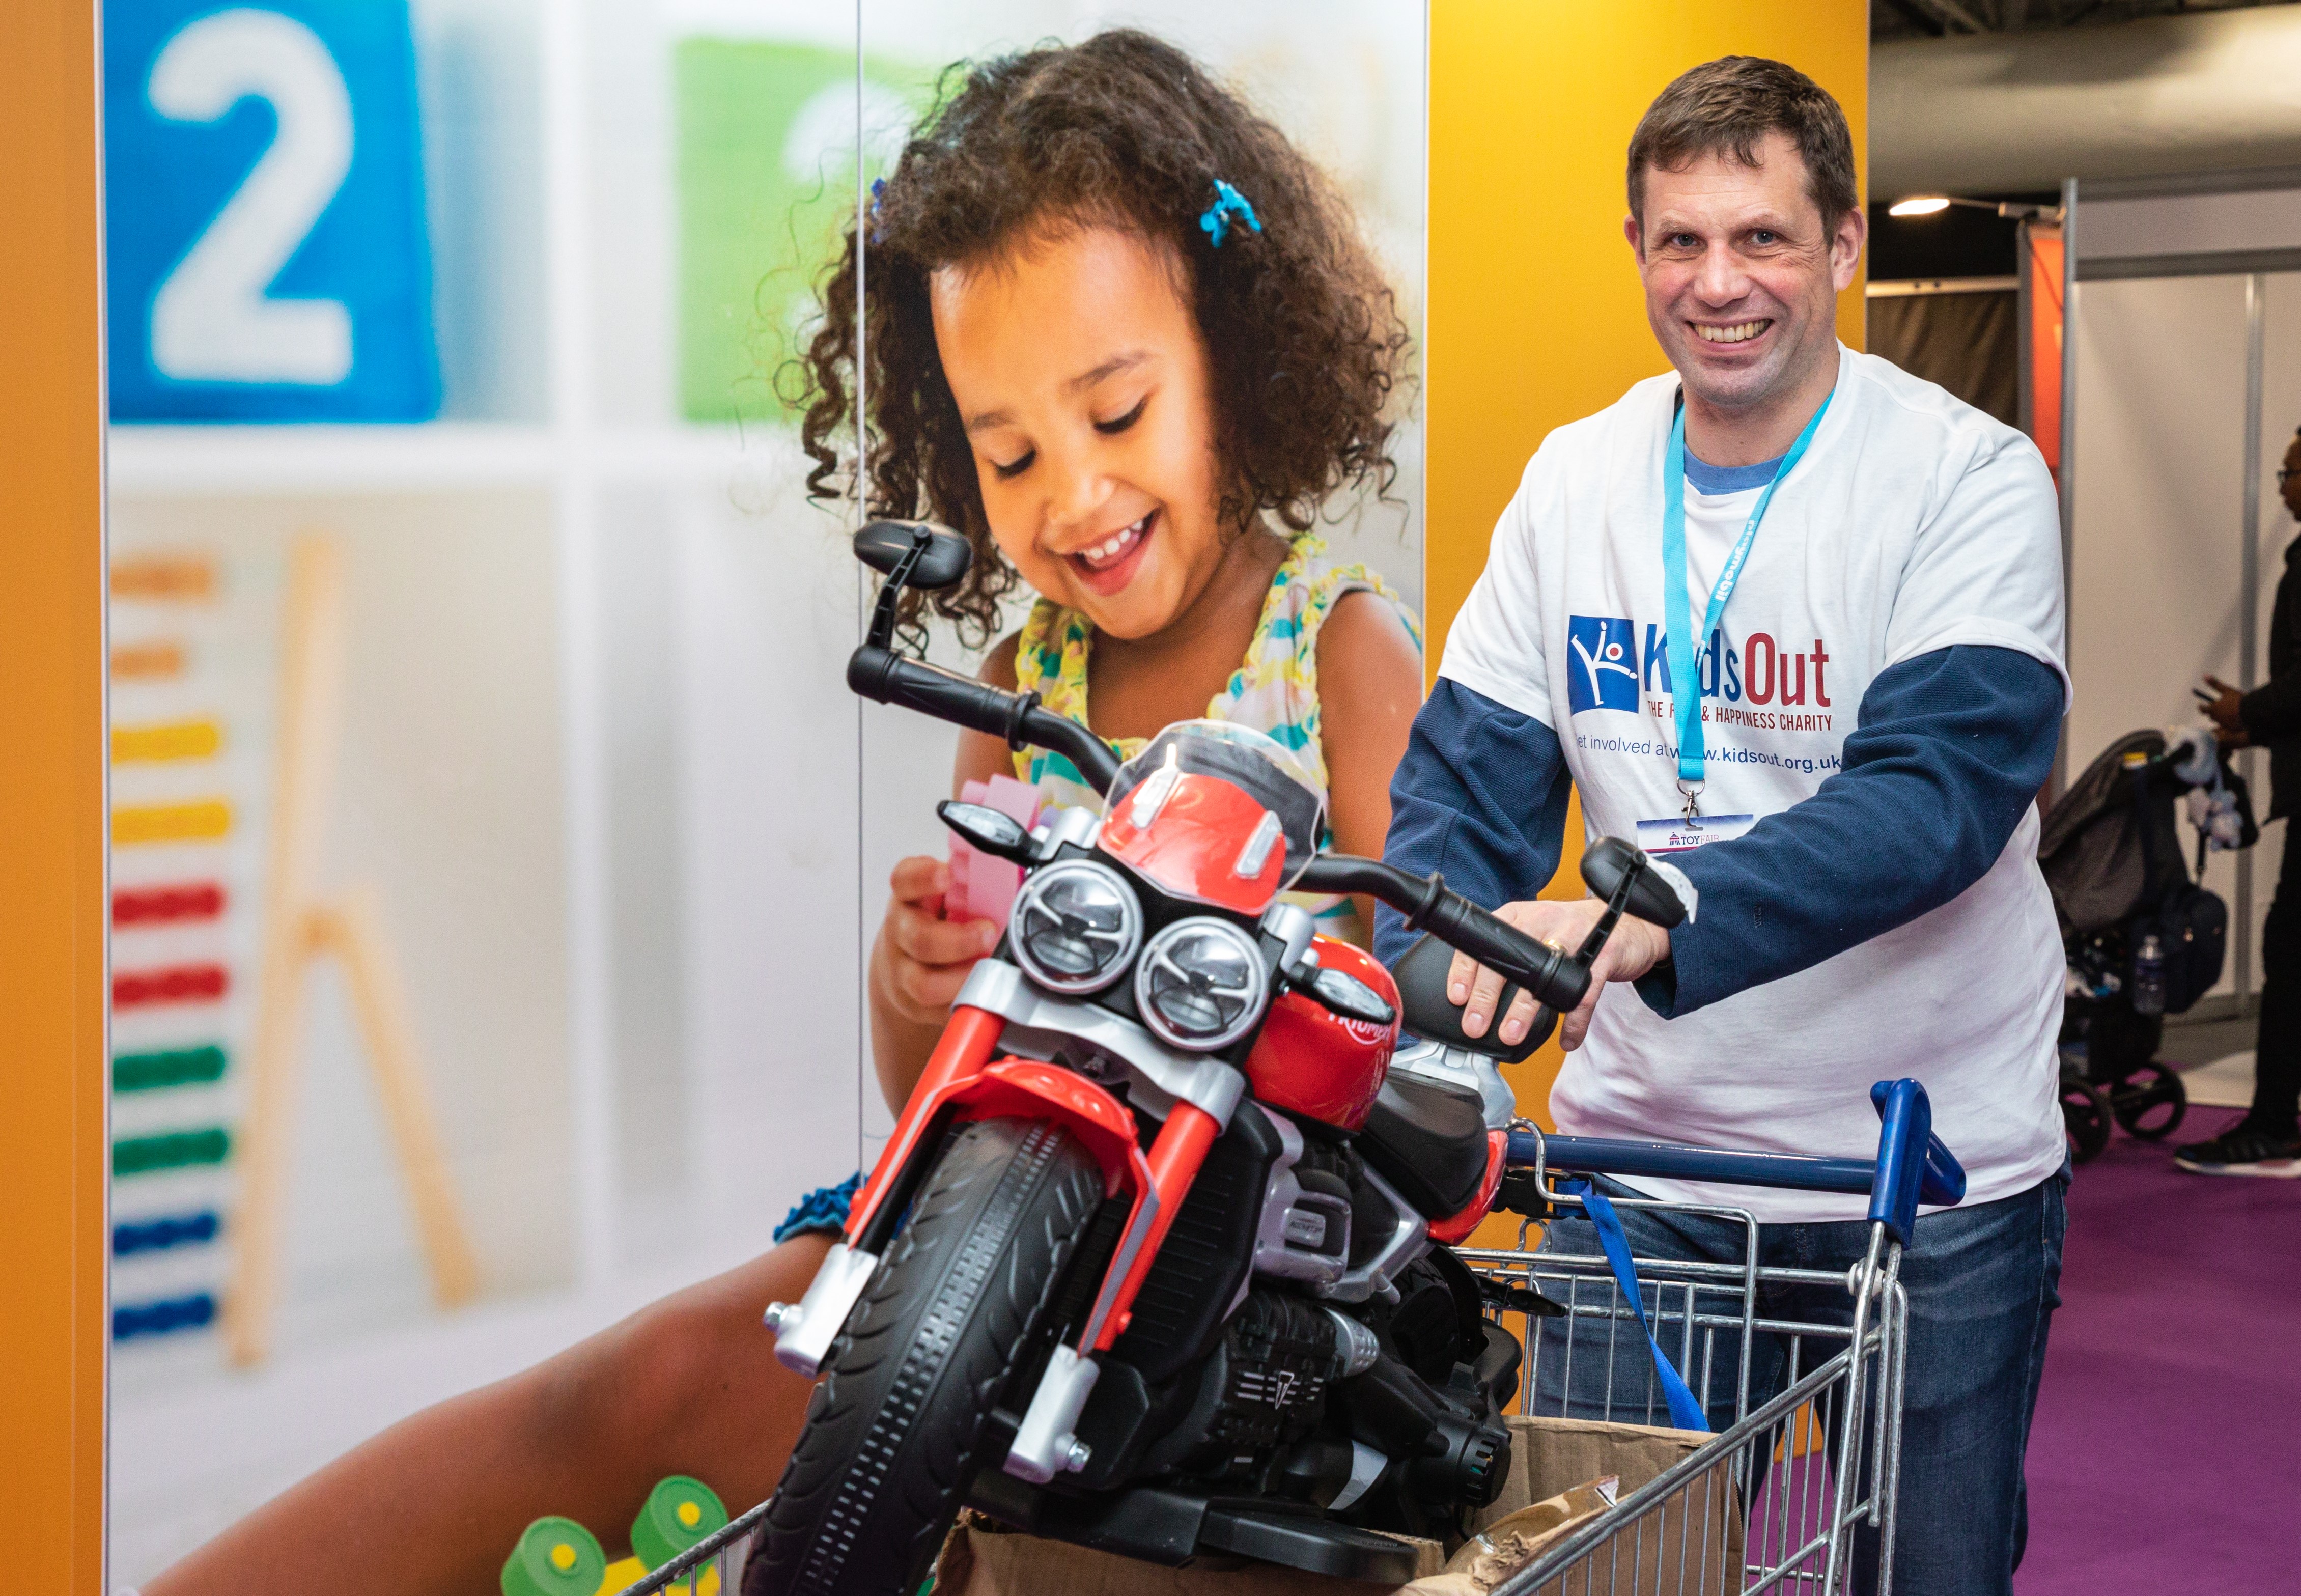 Man smiling with a children's toy motor bike in a shopping cart